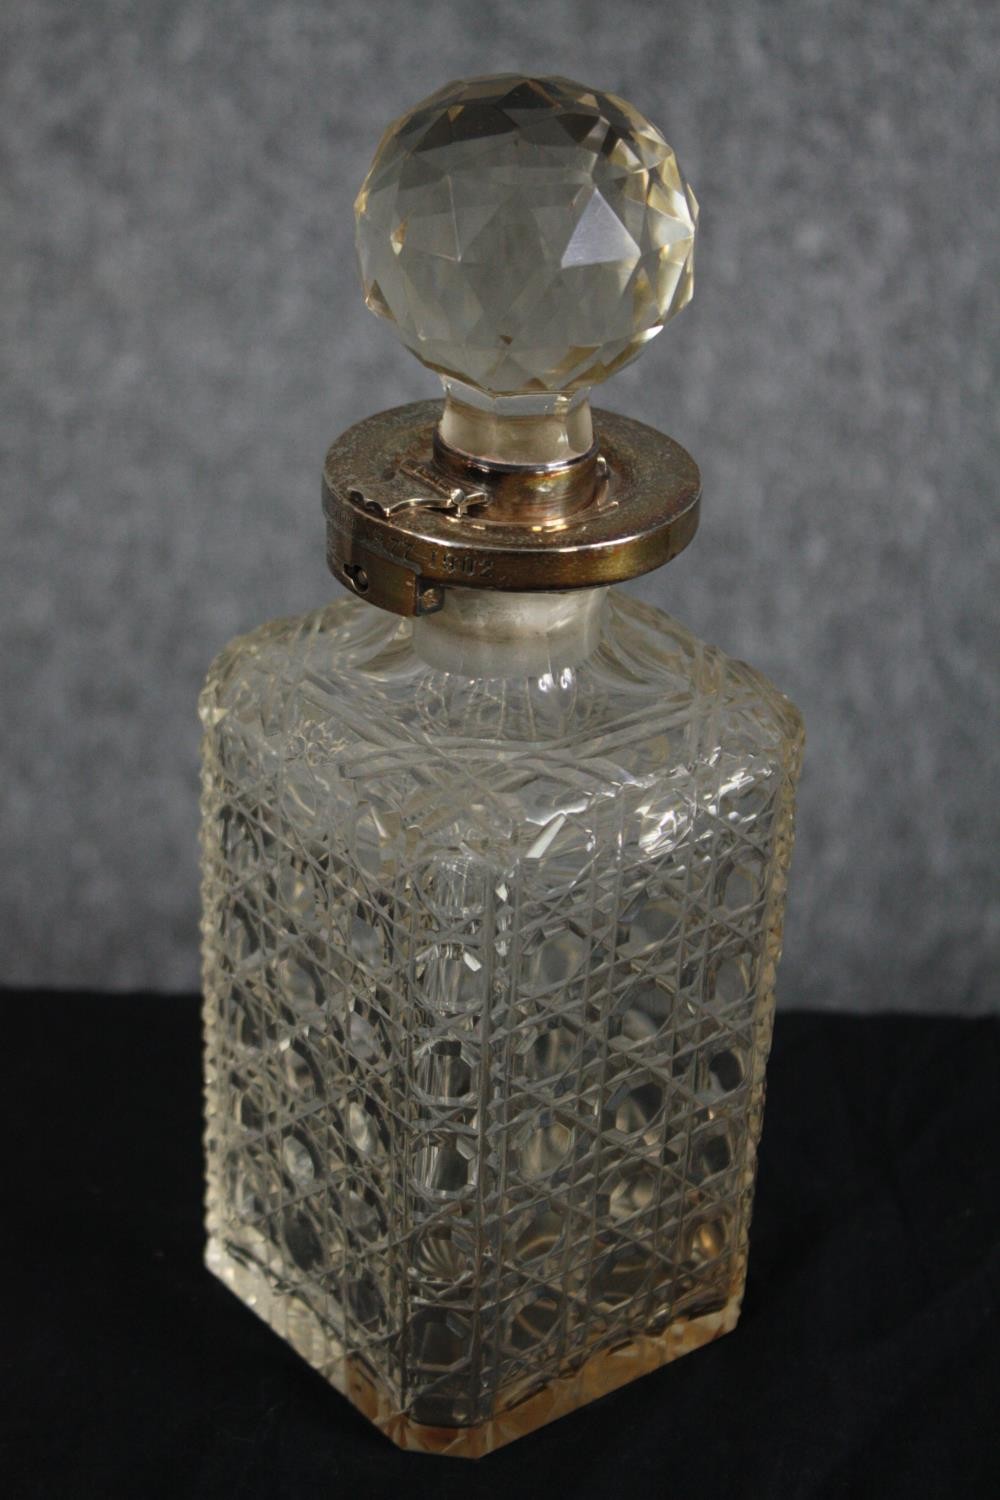 A rare antique cut glass decanter with silver Betjemann's patent lock. Missing its key but unlocked. - Image 2 of 3